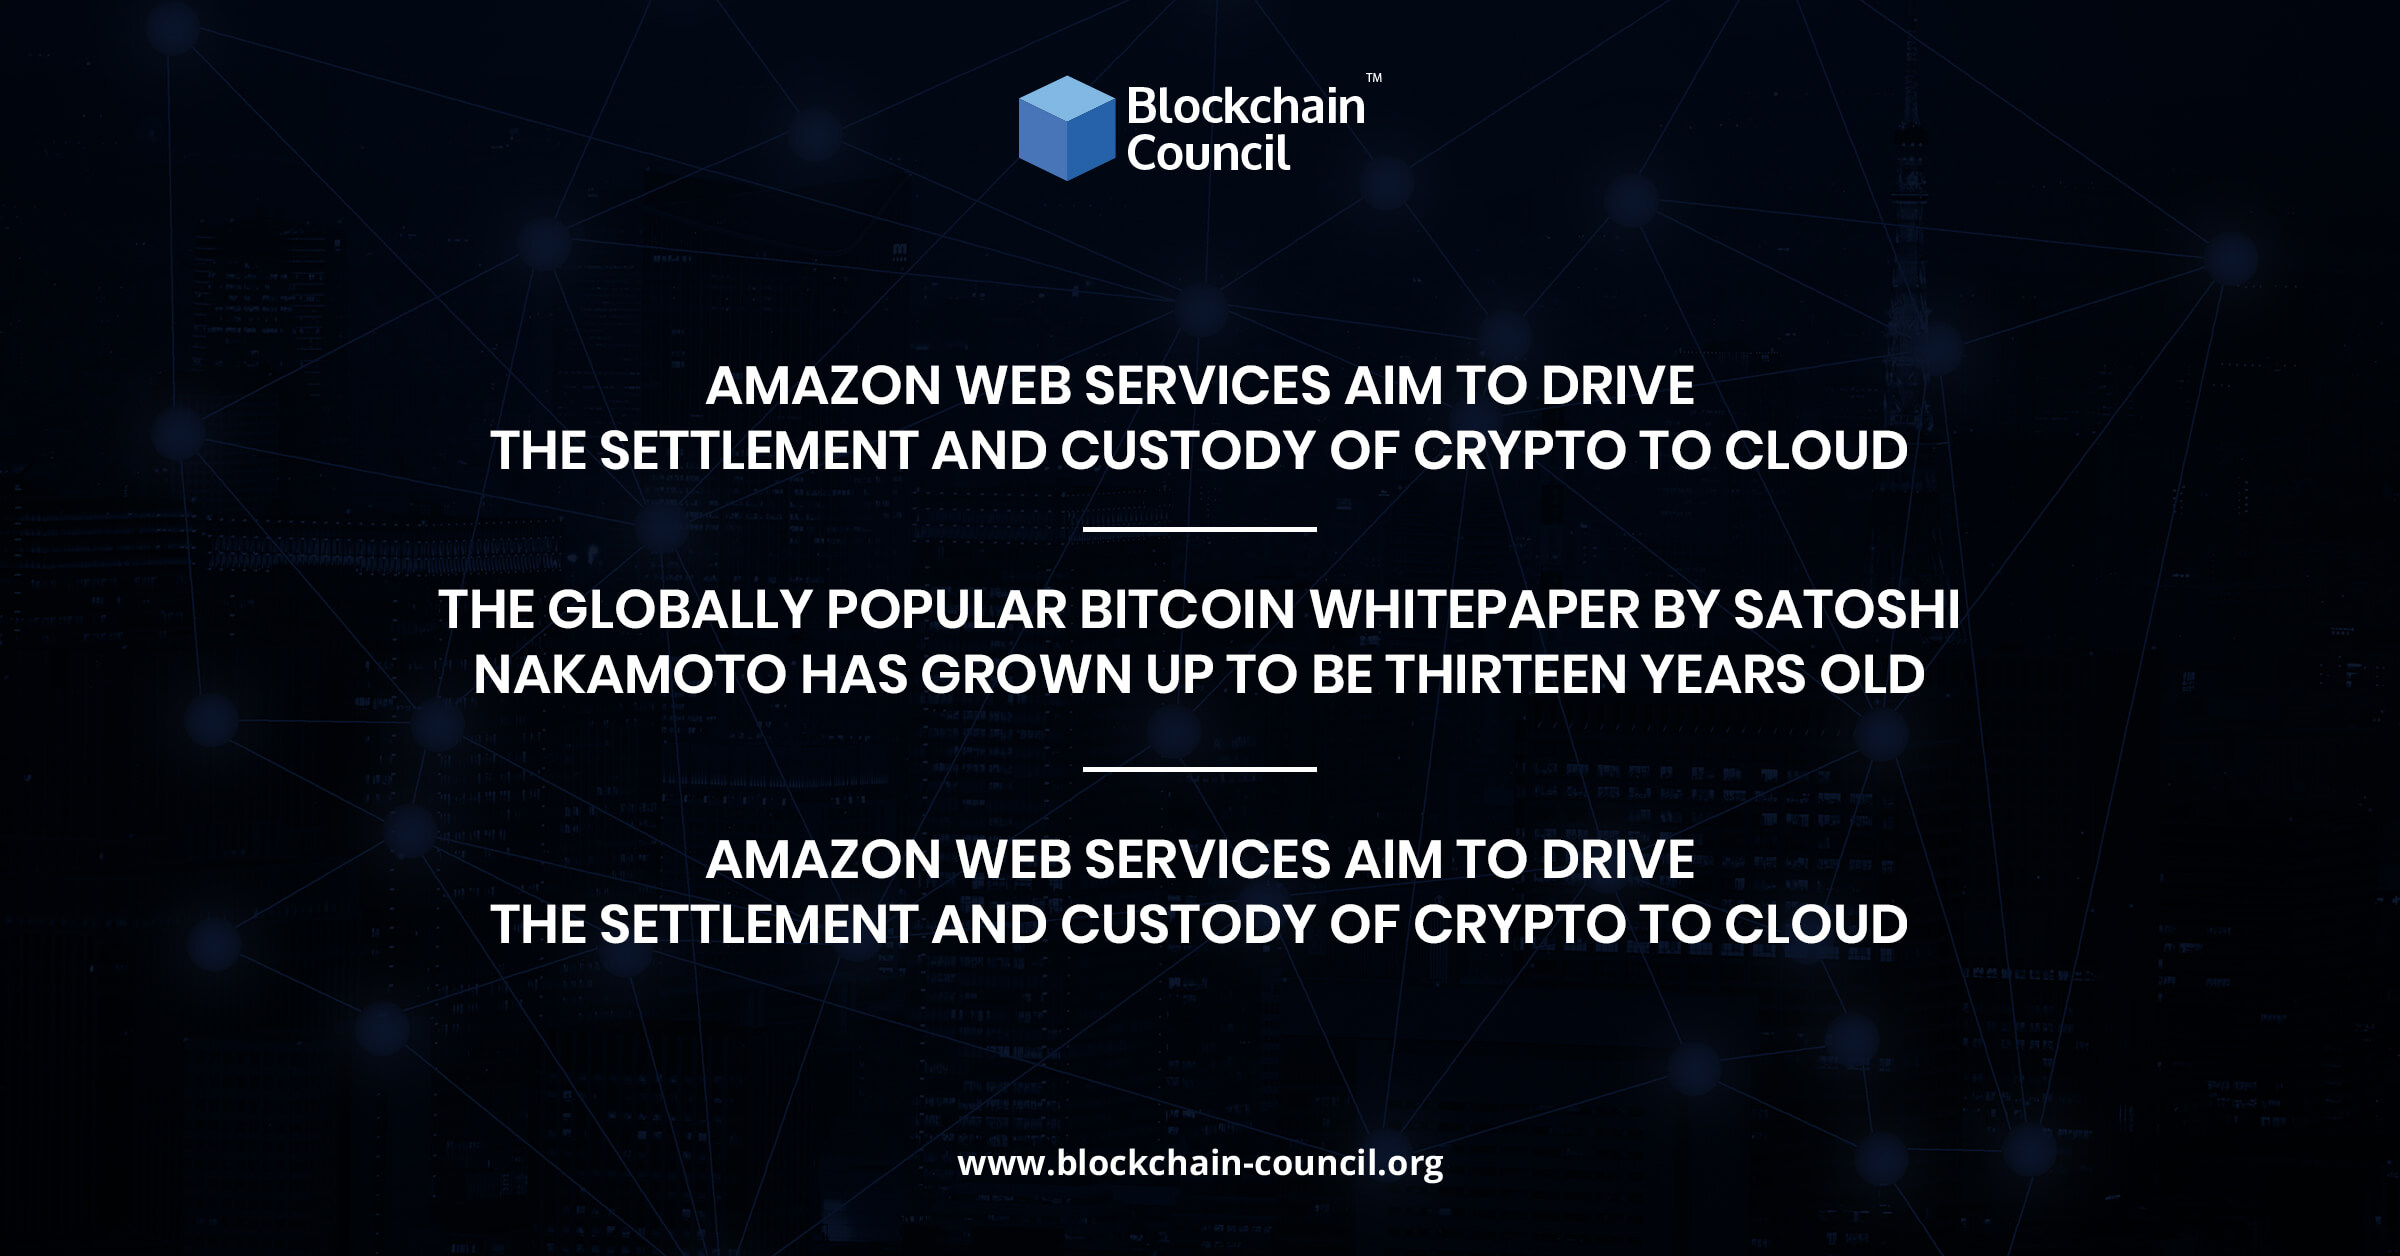 Amazon Web Services Aim To Drive The Settlement And Custody Of Crypto To Cloud (1)